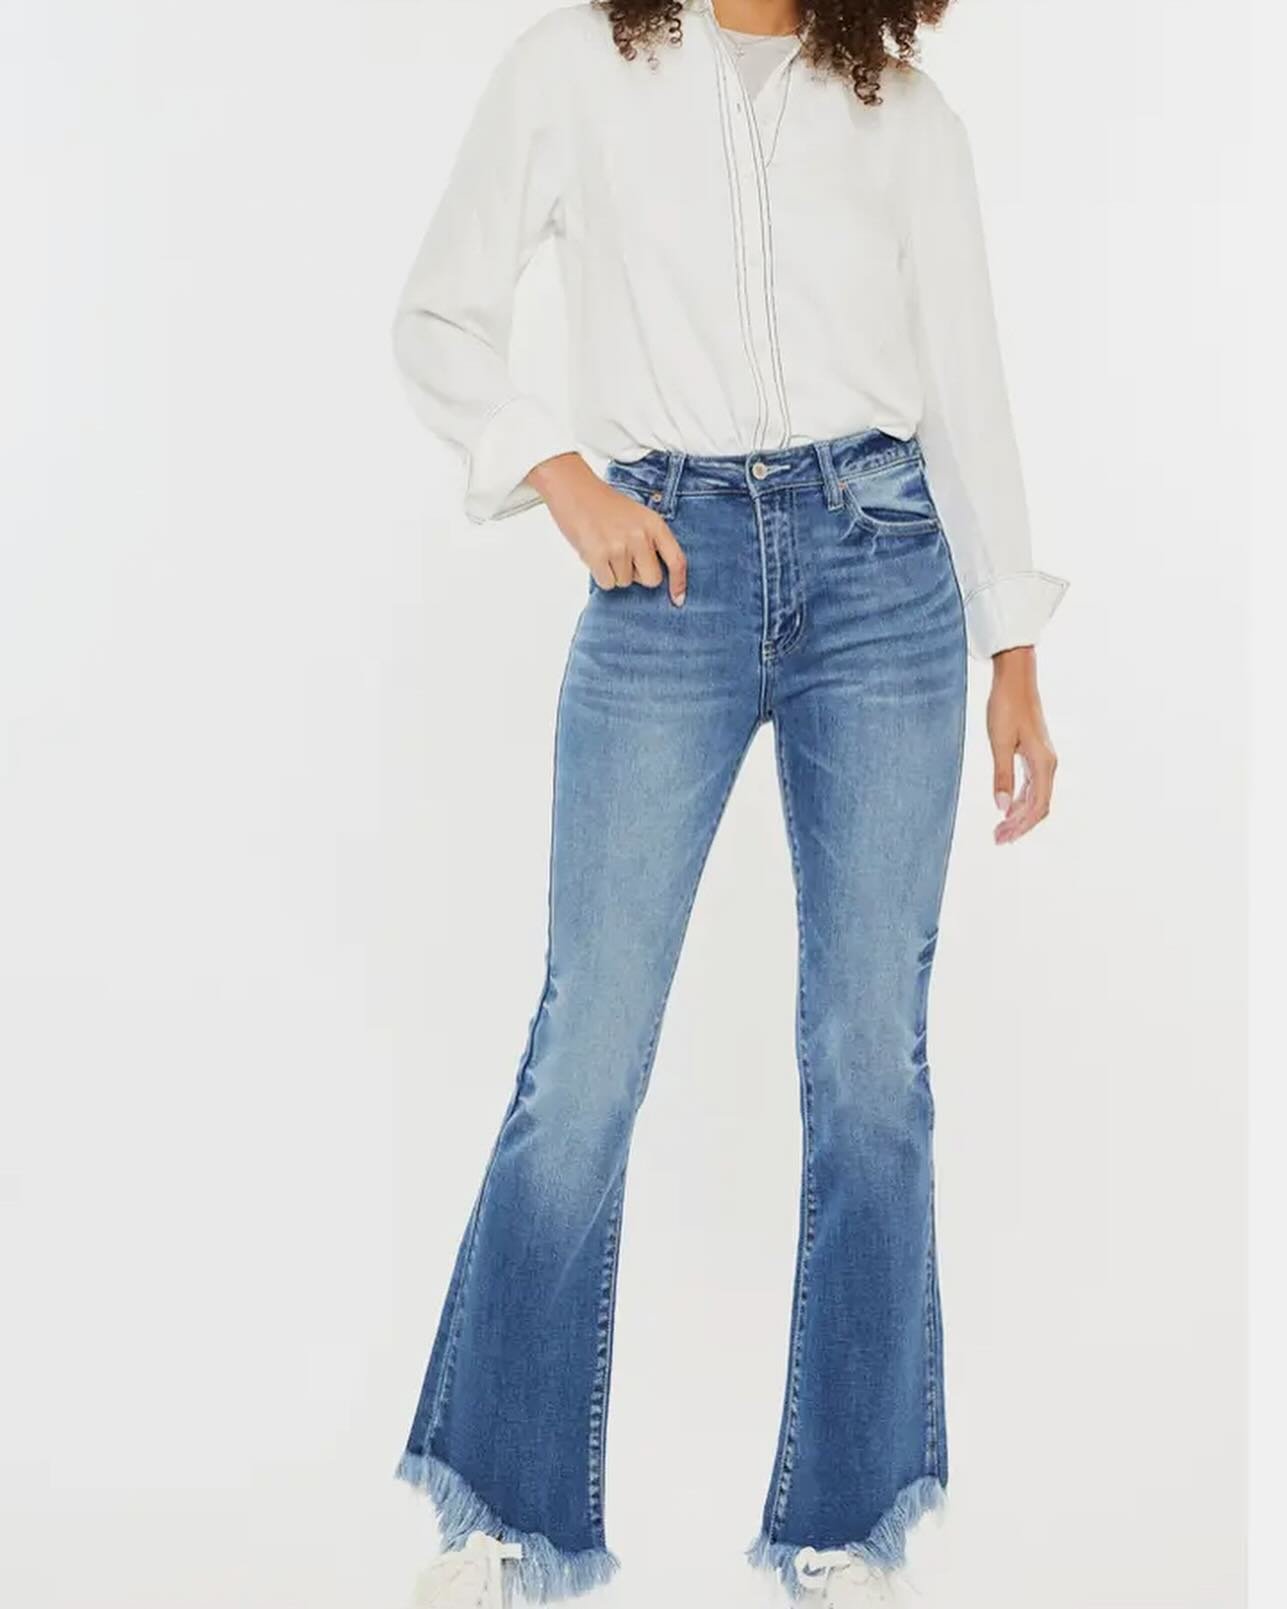 NEW Kan Can frayed hem high rise bootcut jeans and denim shorts have just arrived to our Sylva store! They&rsquo;ll be out on our racks later today! 👖💕